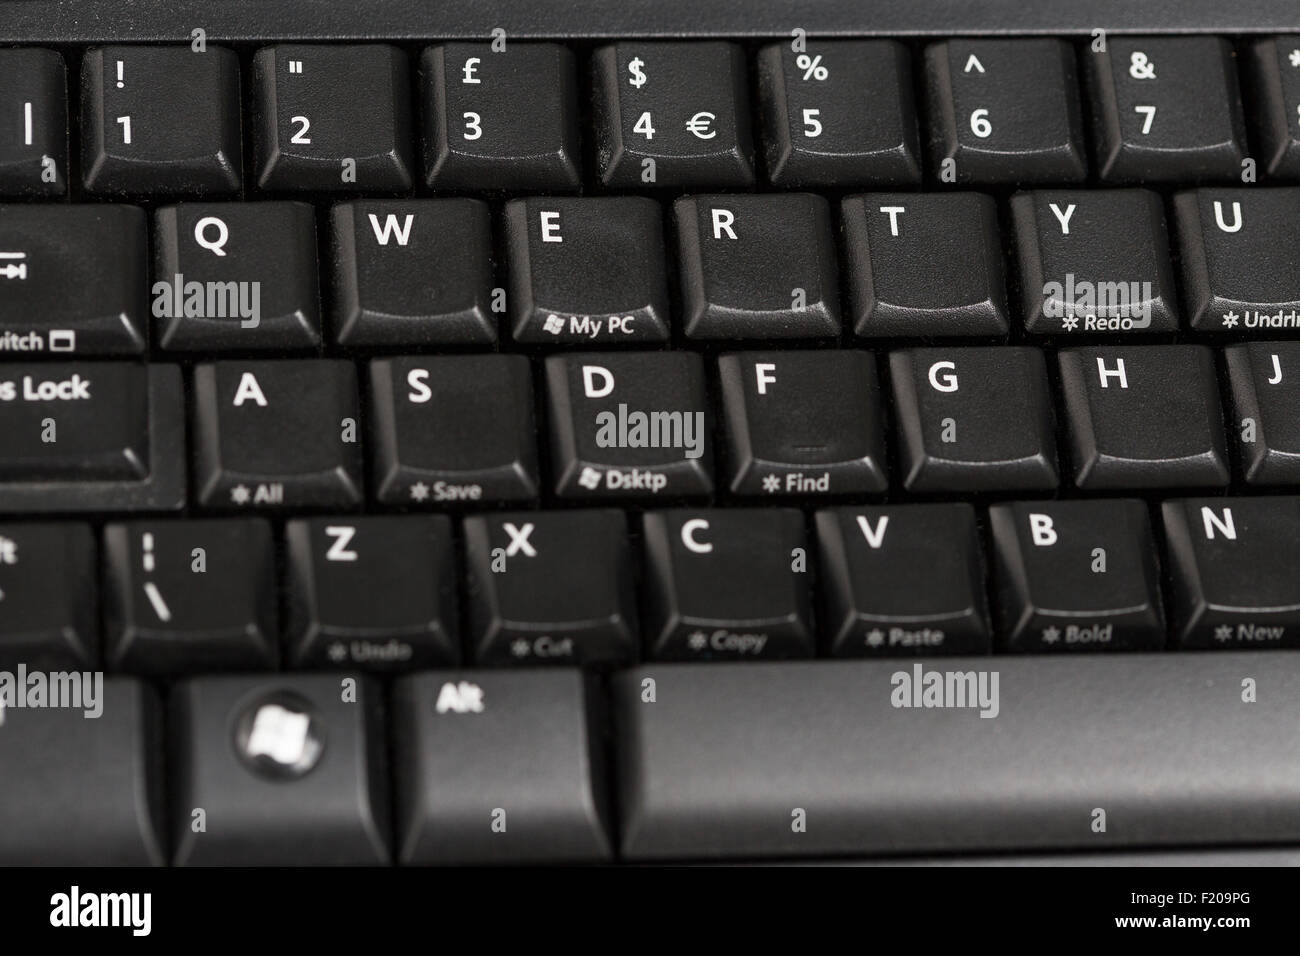 Qwerty Computer Wireless Keyboard and Mouse Stock Photo